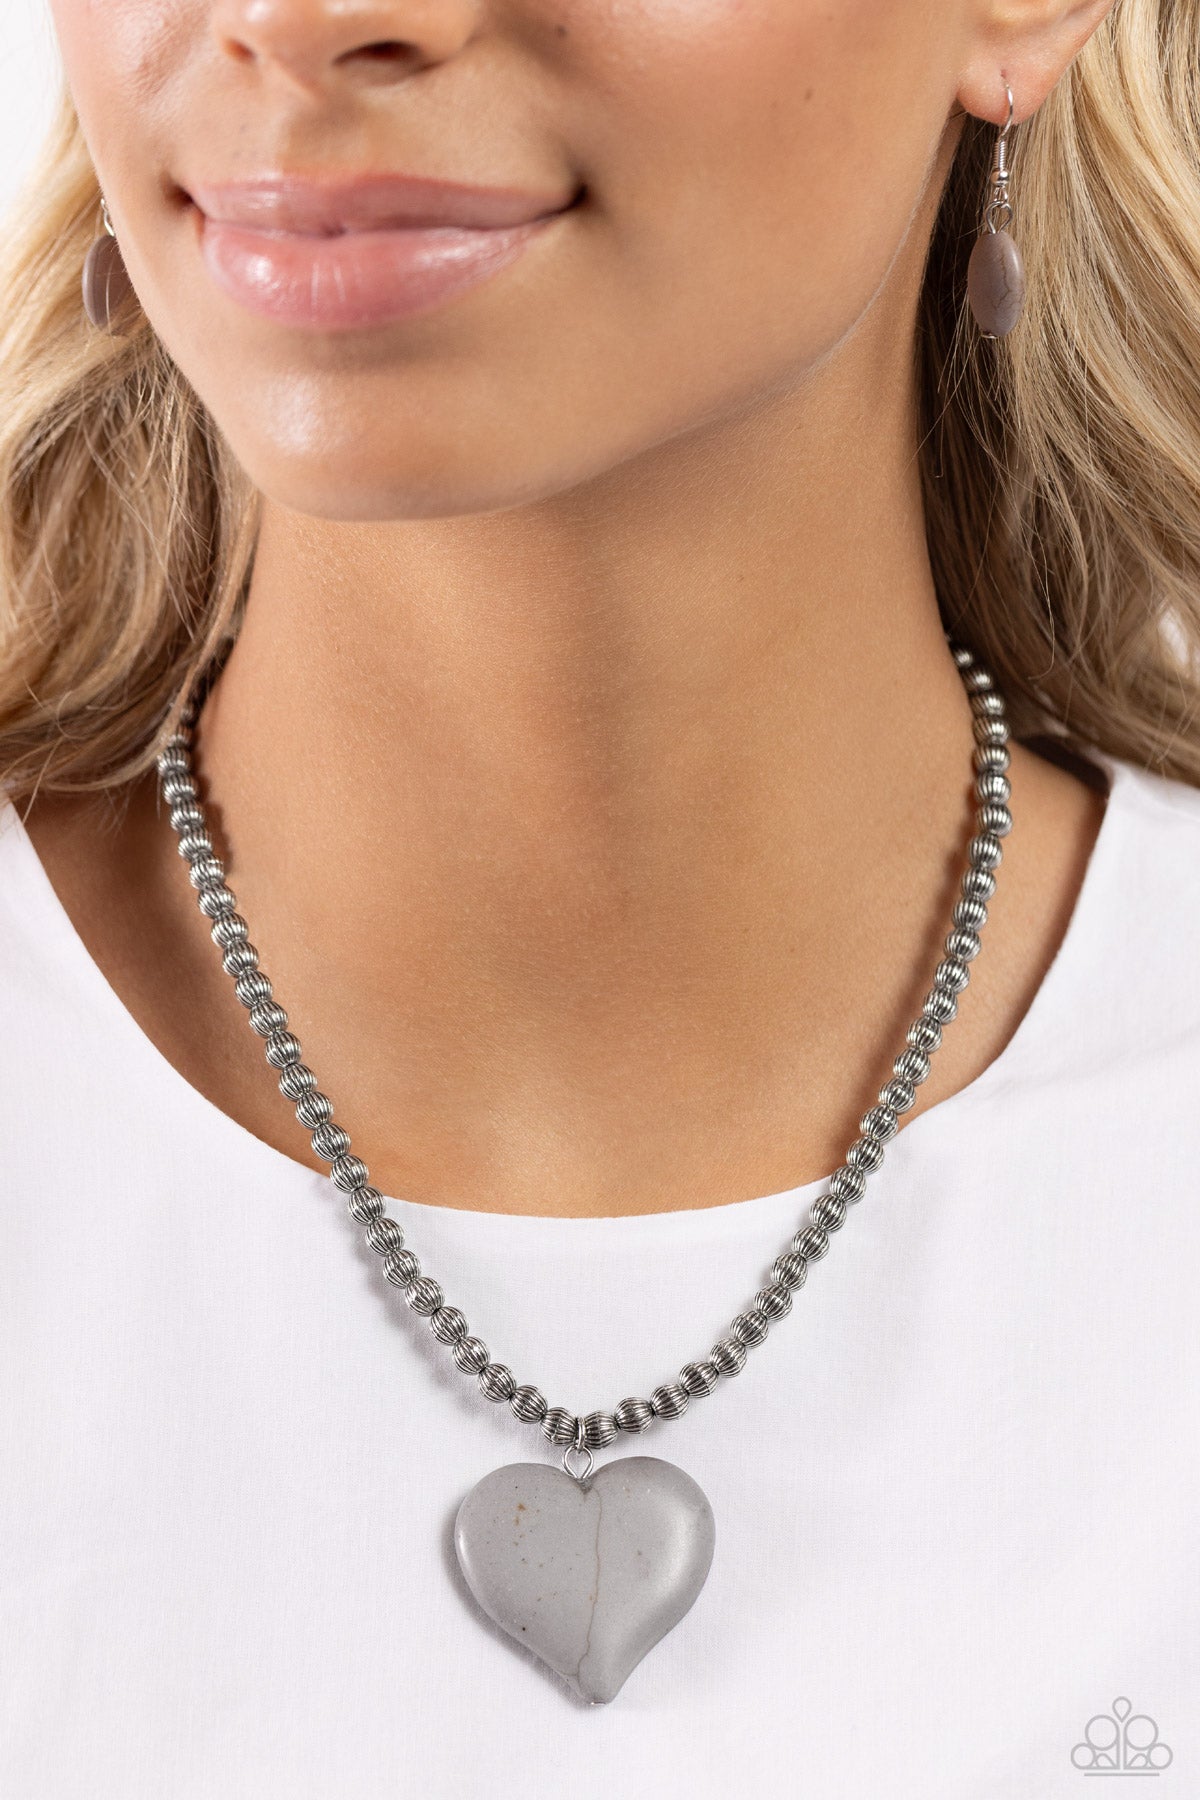 Picturesque Pairing - Silver Necklace